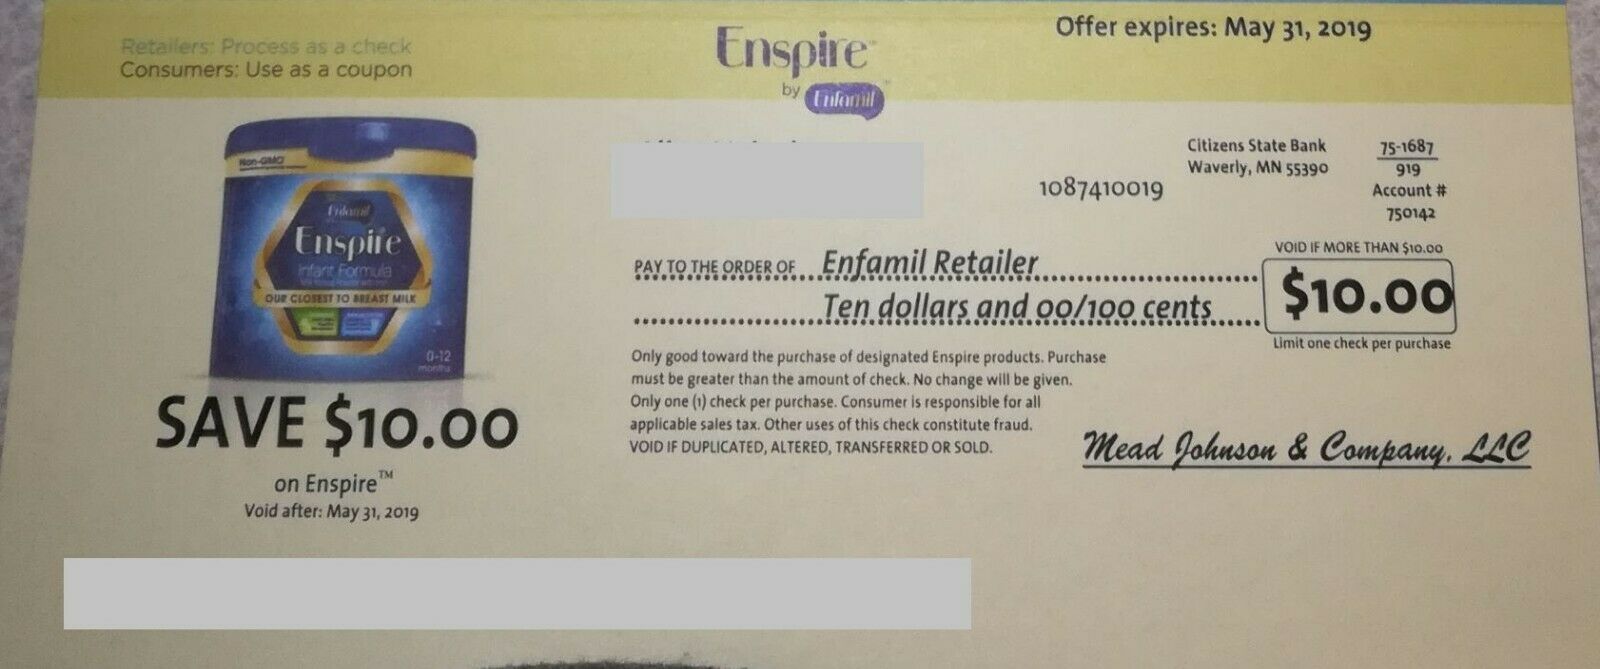 $10 off Coupon For Enfamil Enspire Formula Expires May 31st